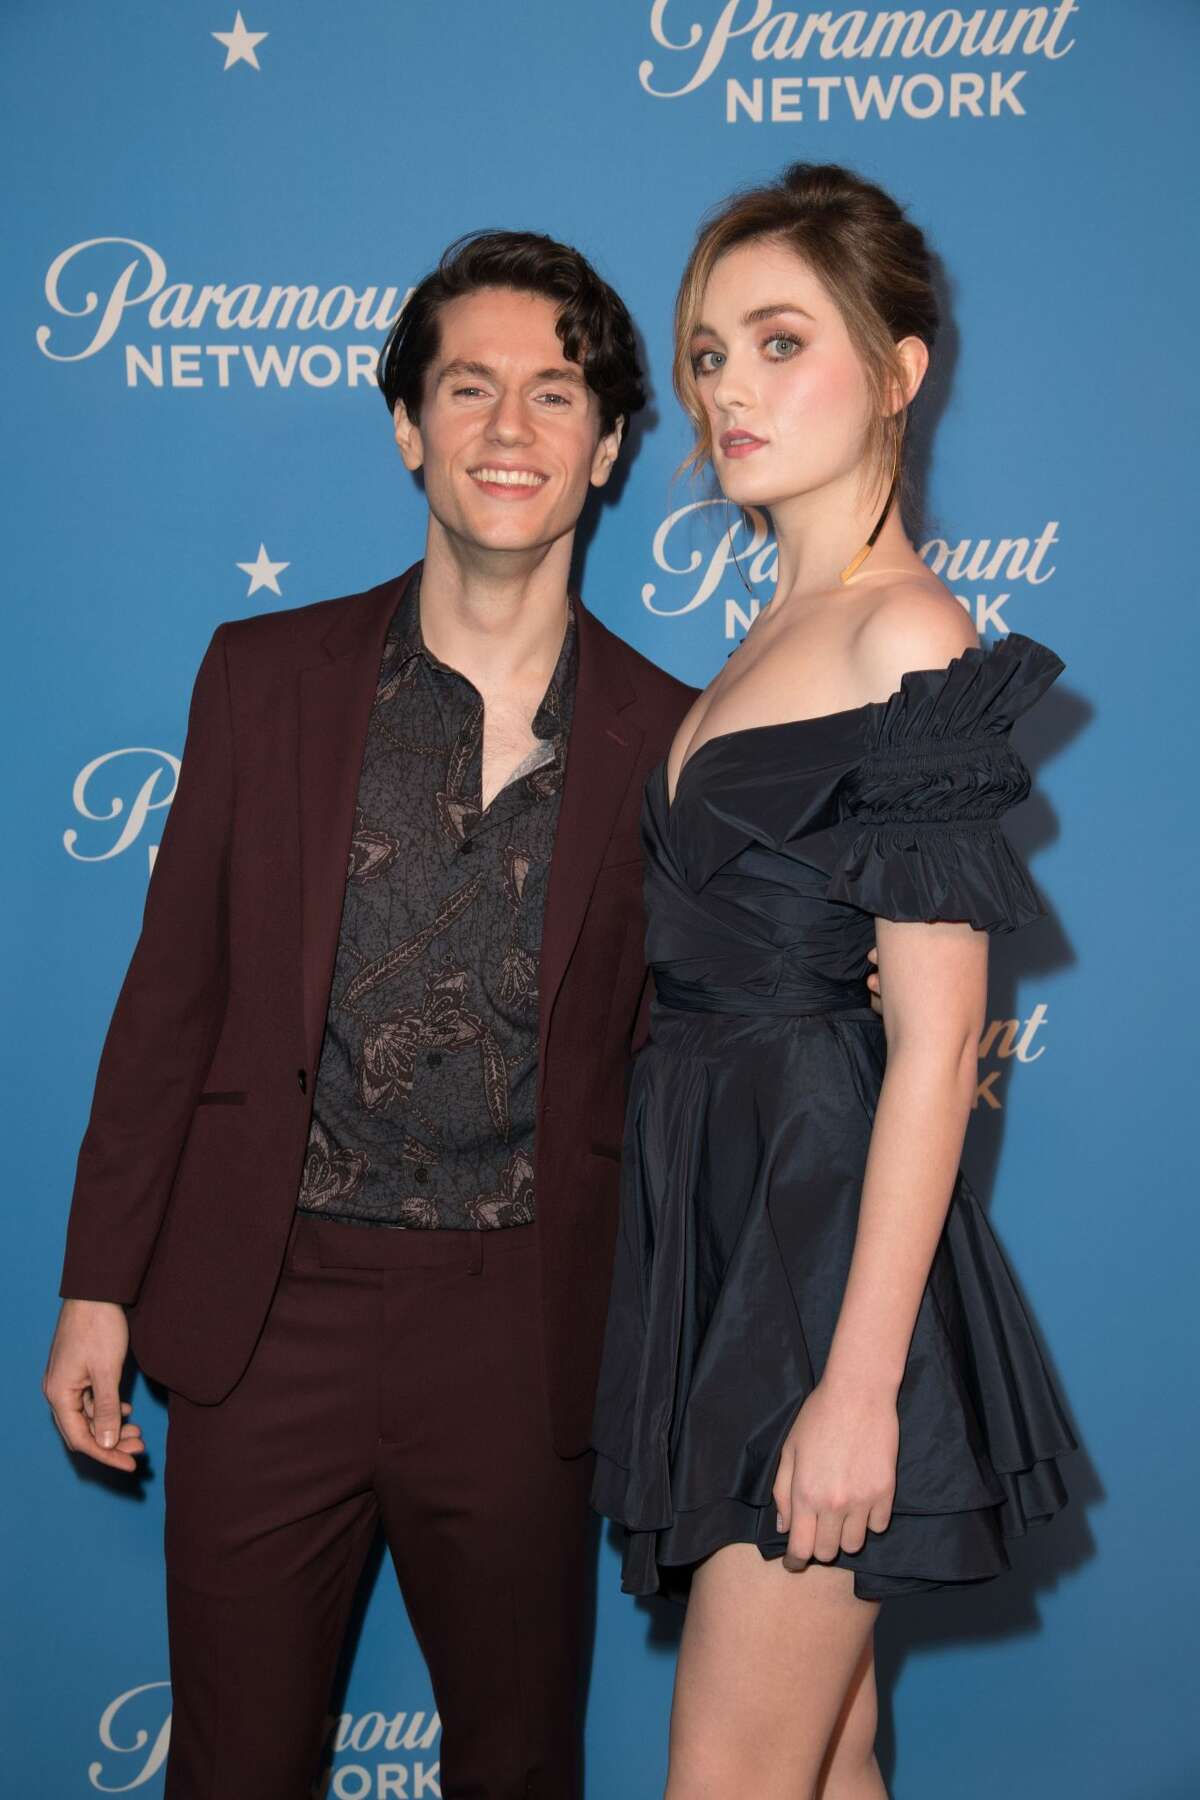 LOS ANGELES, CA - JANUARY 18: (L-R) James Scully and Grace Victoria Cox attend Paramount Network Launch Party at Sunset Tower on January 18, 2018 in Los Angeles, California. (Photo by Earl Gibson III/Getty Images)